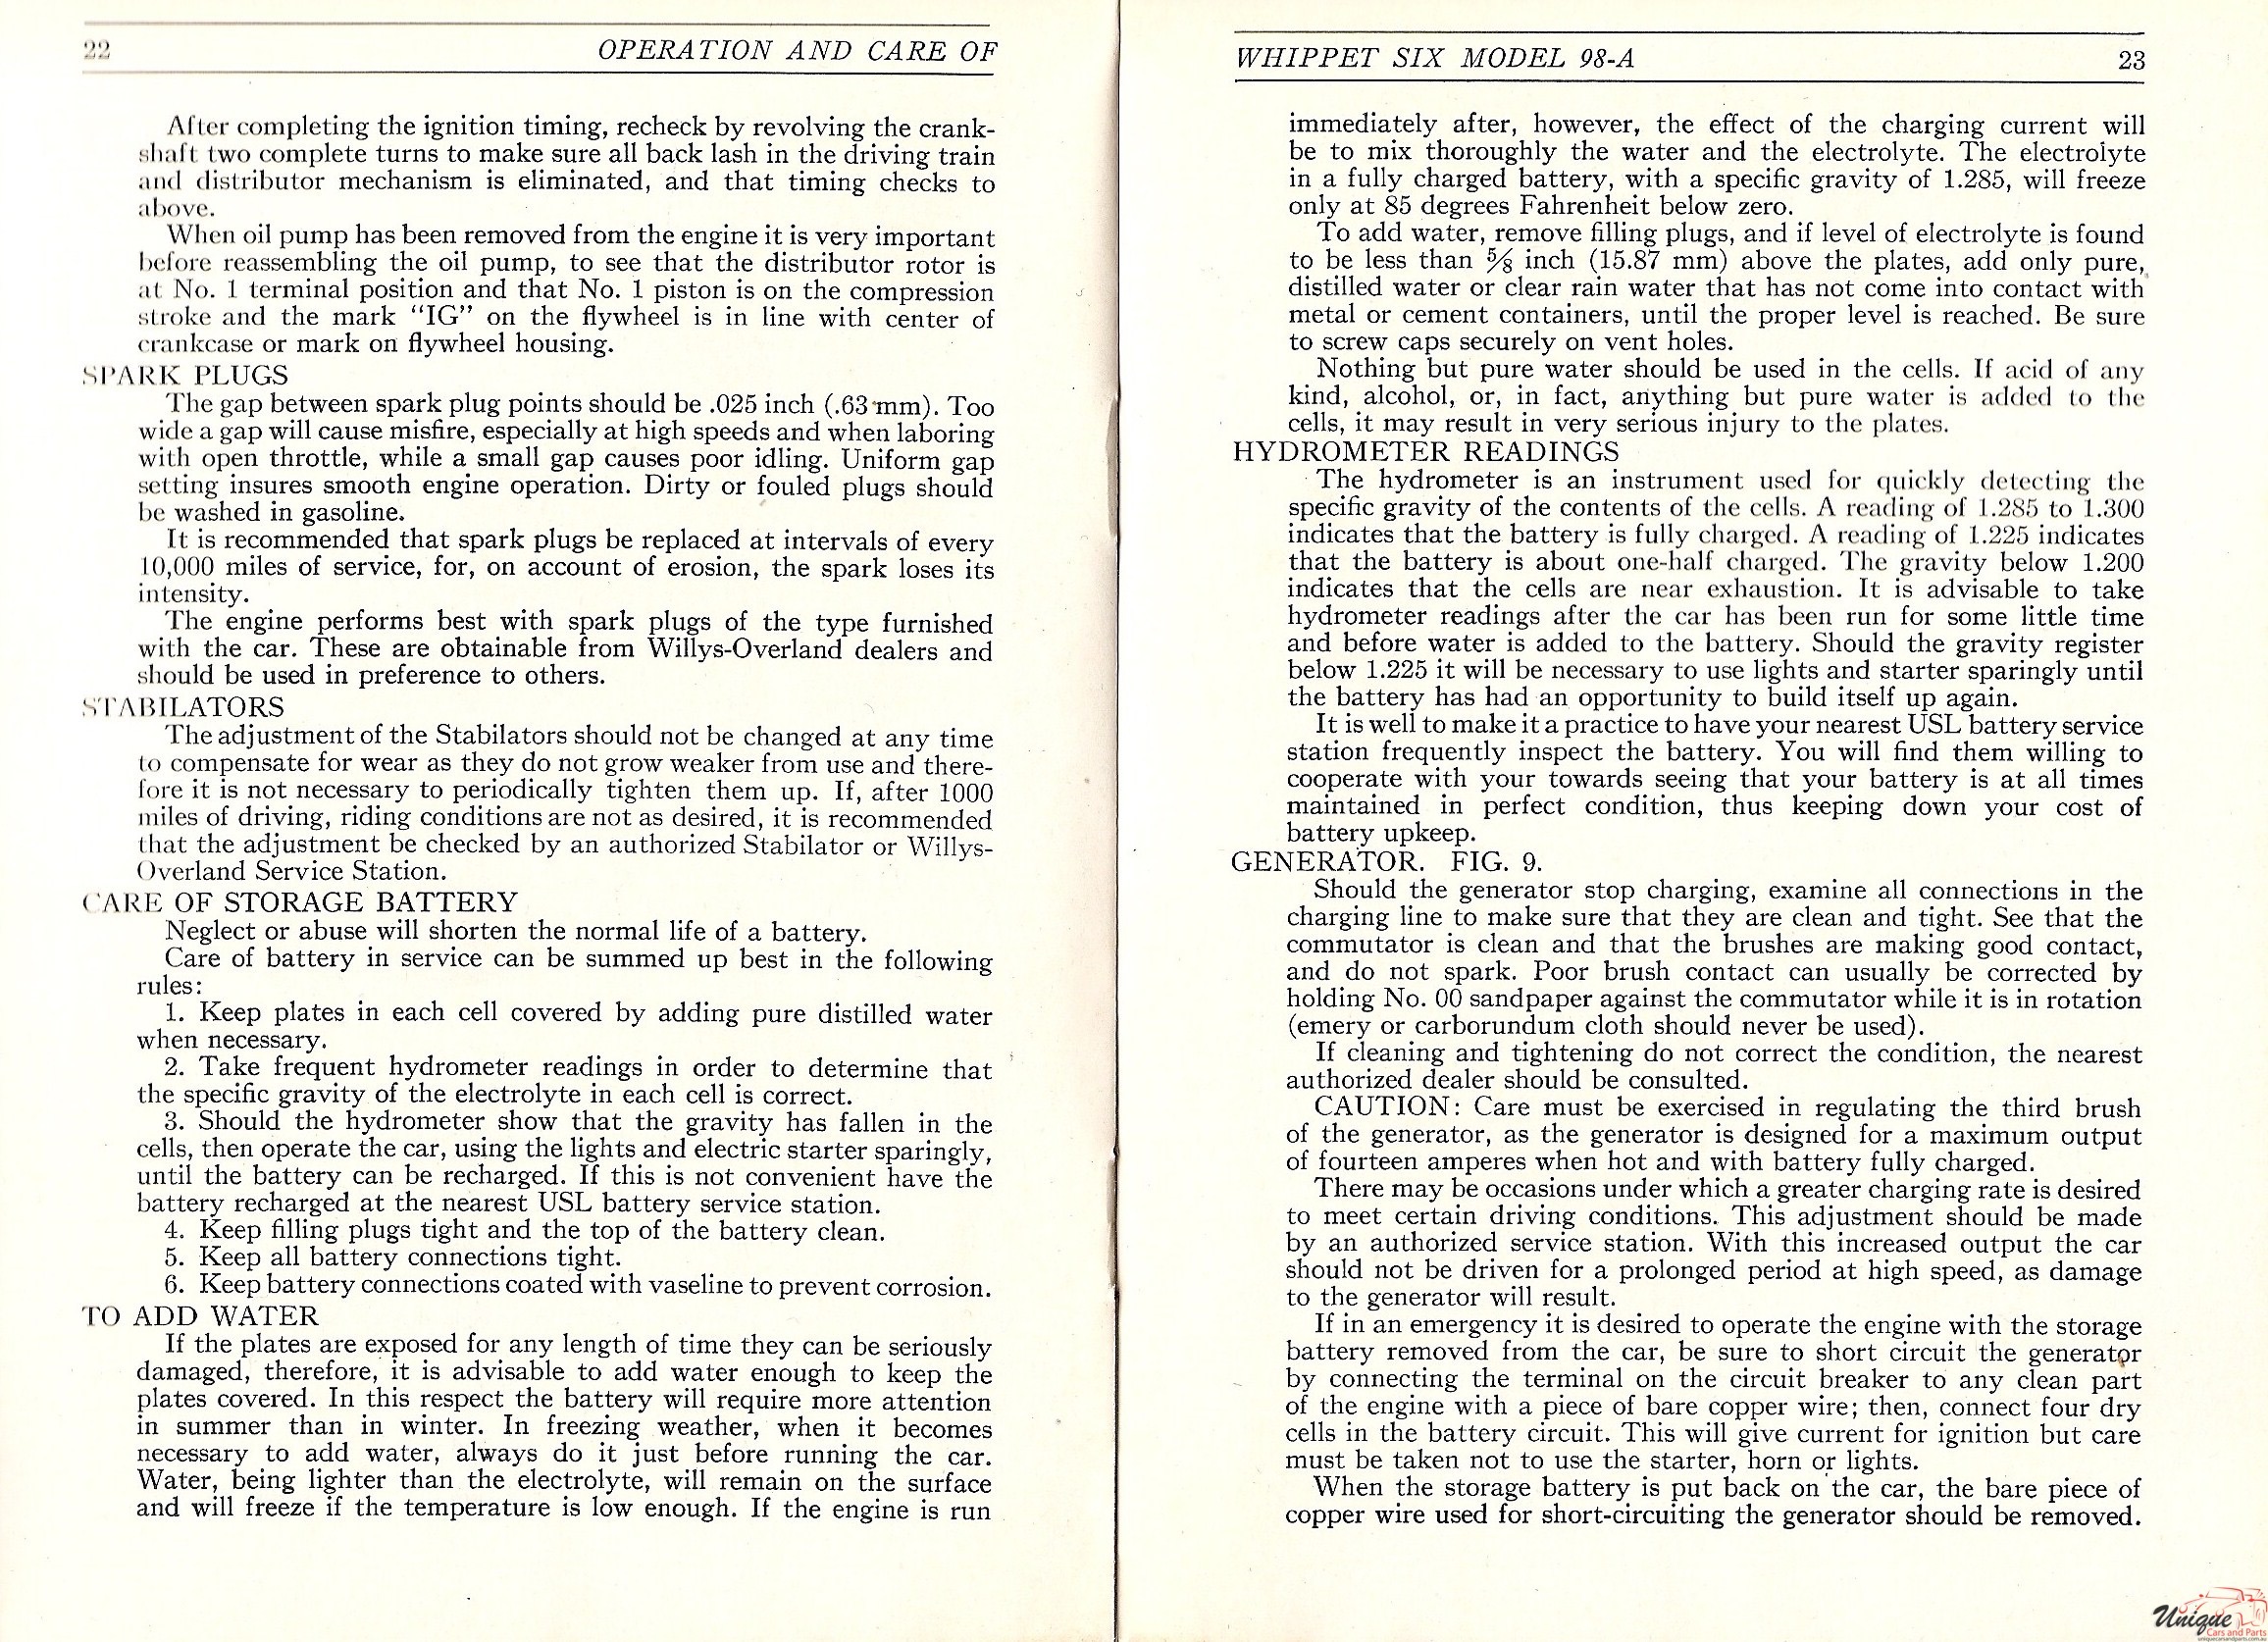 1929 Whippet Operator Manual Page 1